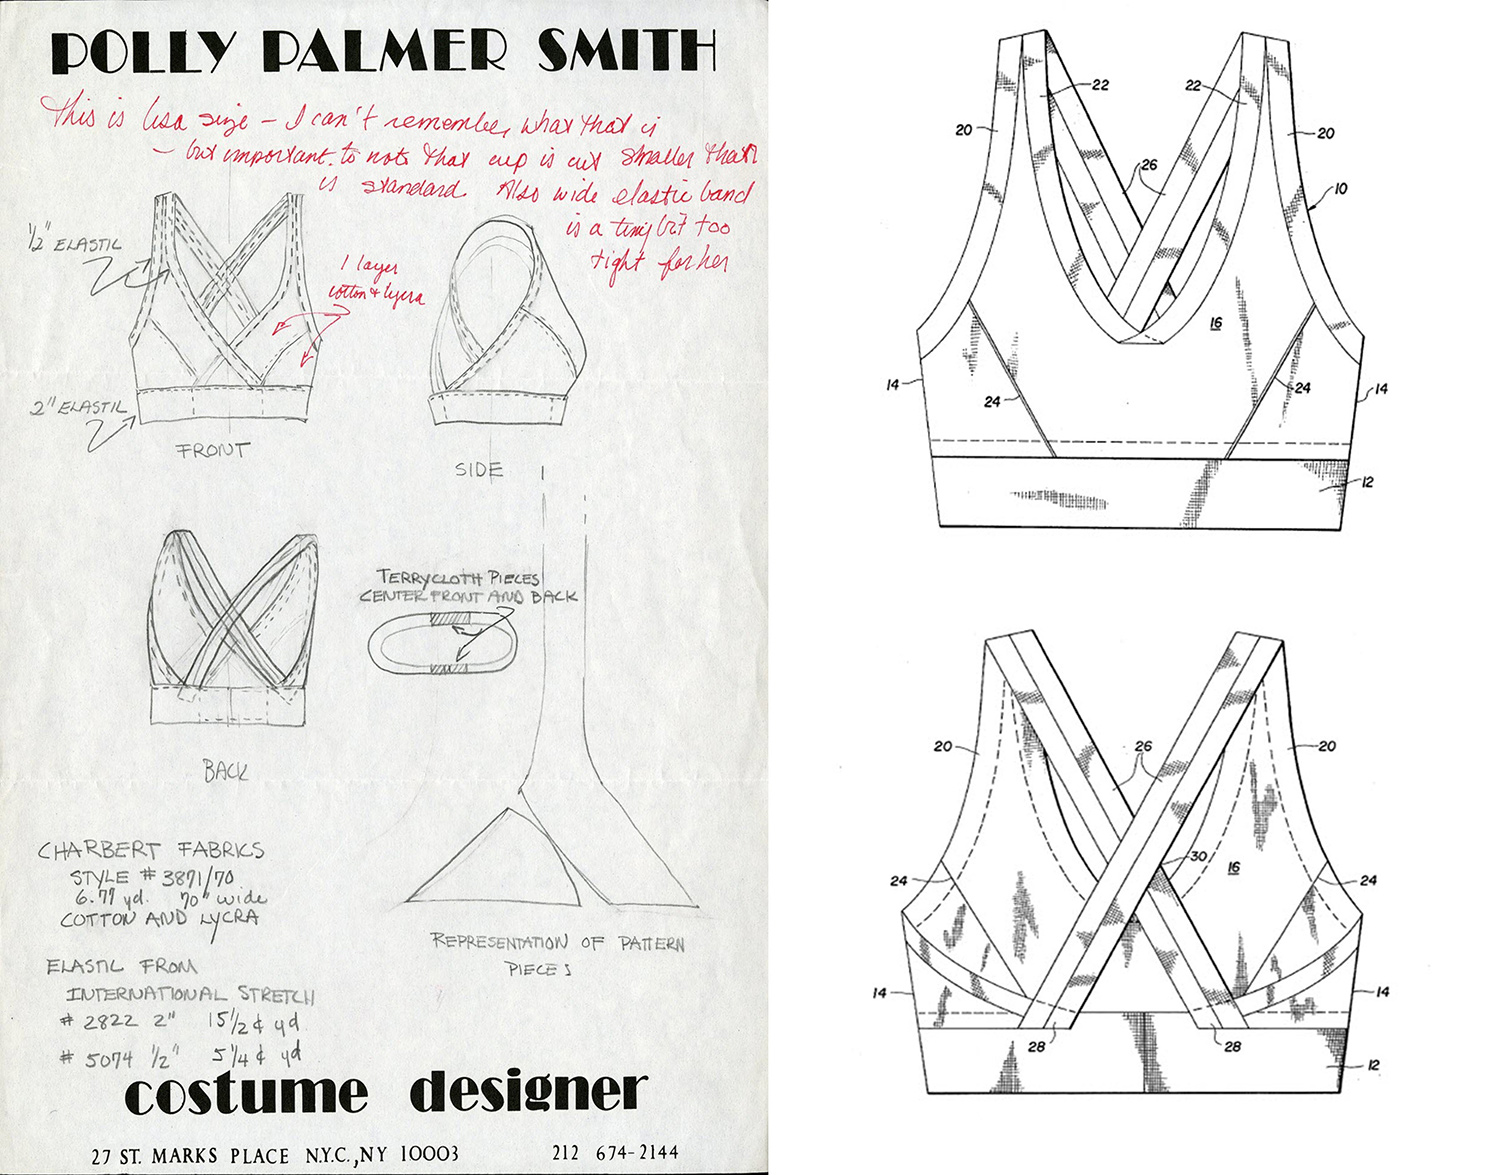 Left: Original sketches of the jogbra on Polly Palmer Smith costume designer stationary. Right: Patent drawings of the front and back of the athletic brassiere. 